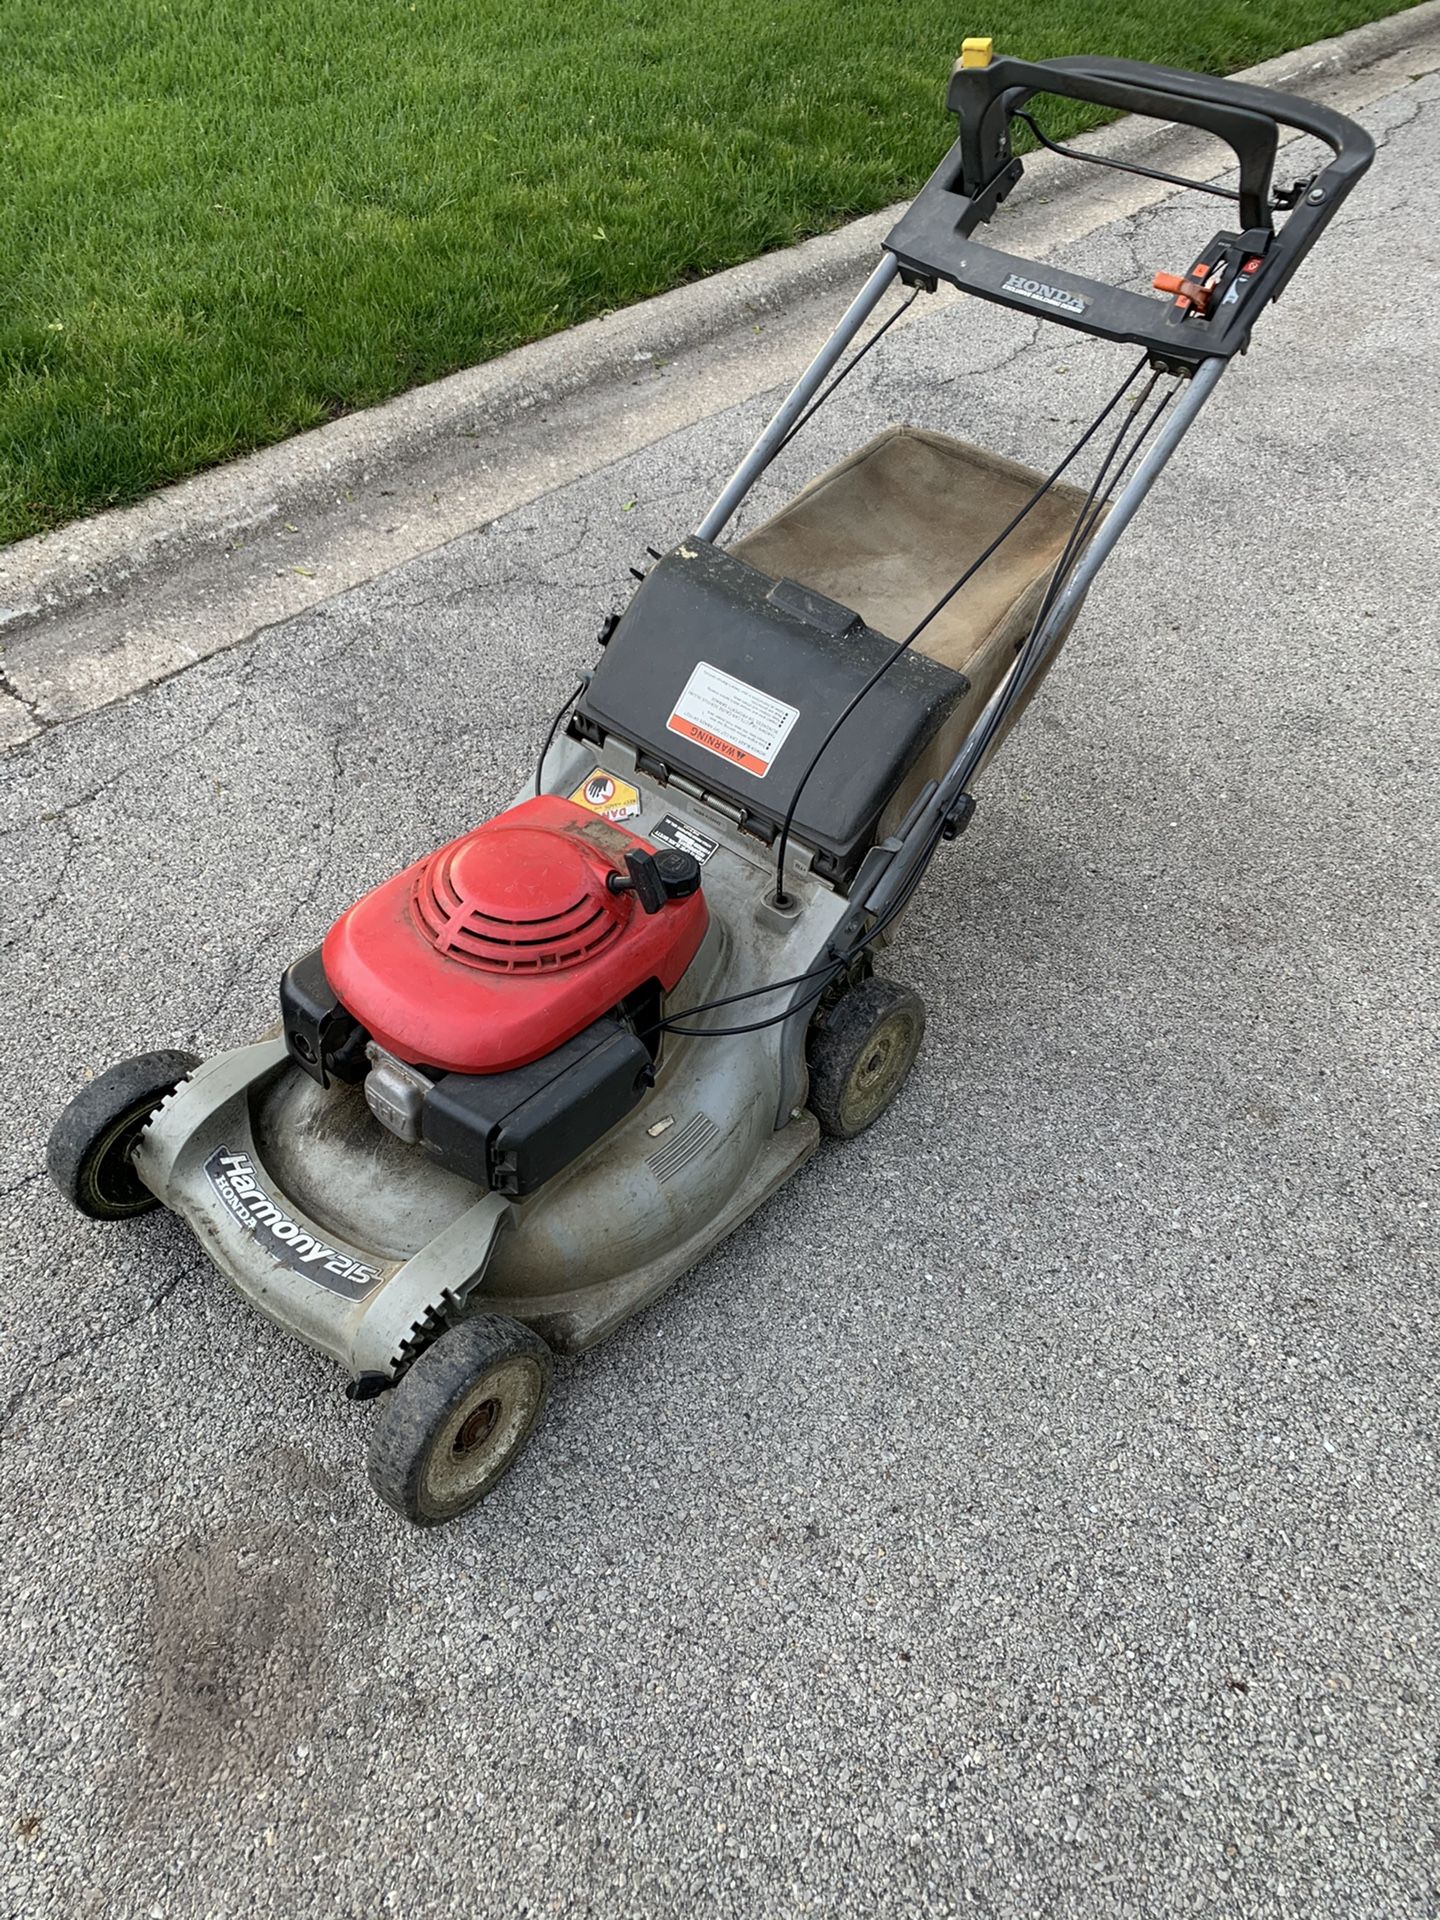 Honda Harmony 215 Self propelled lawn mower with bag. Runs and cuts. Self propelled sometimes stays on, just lift and drop handle and it goes off. Lo